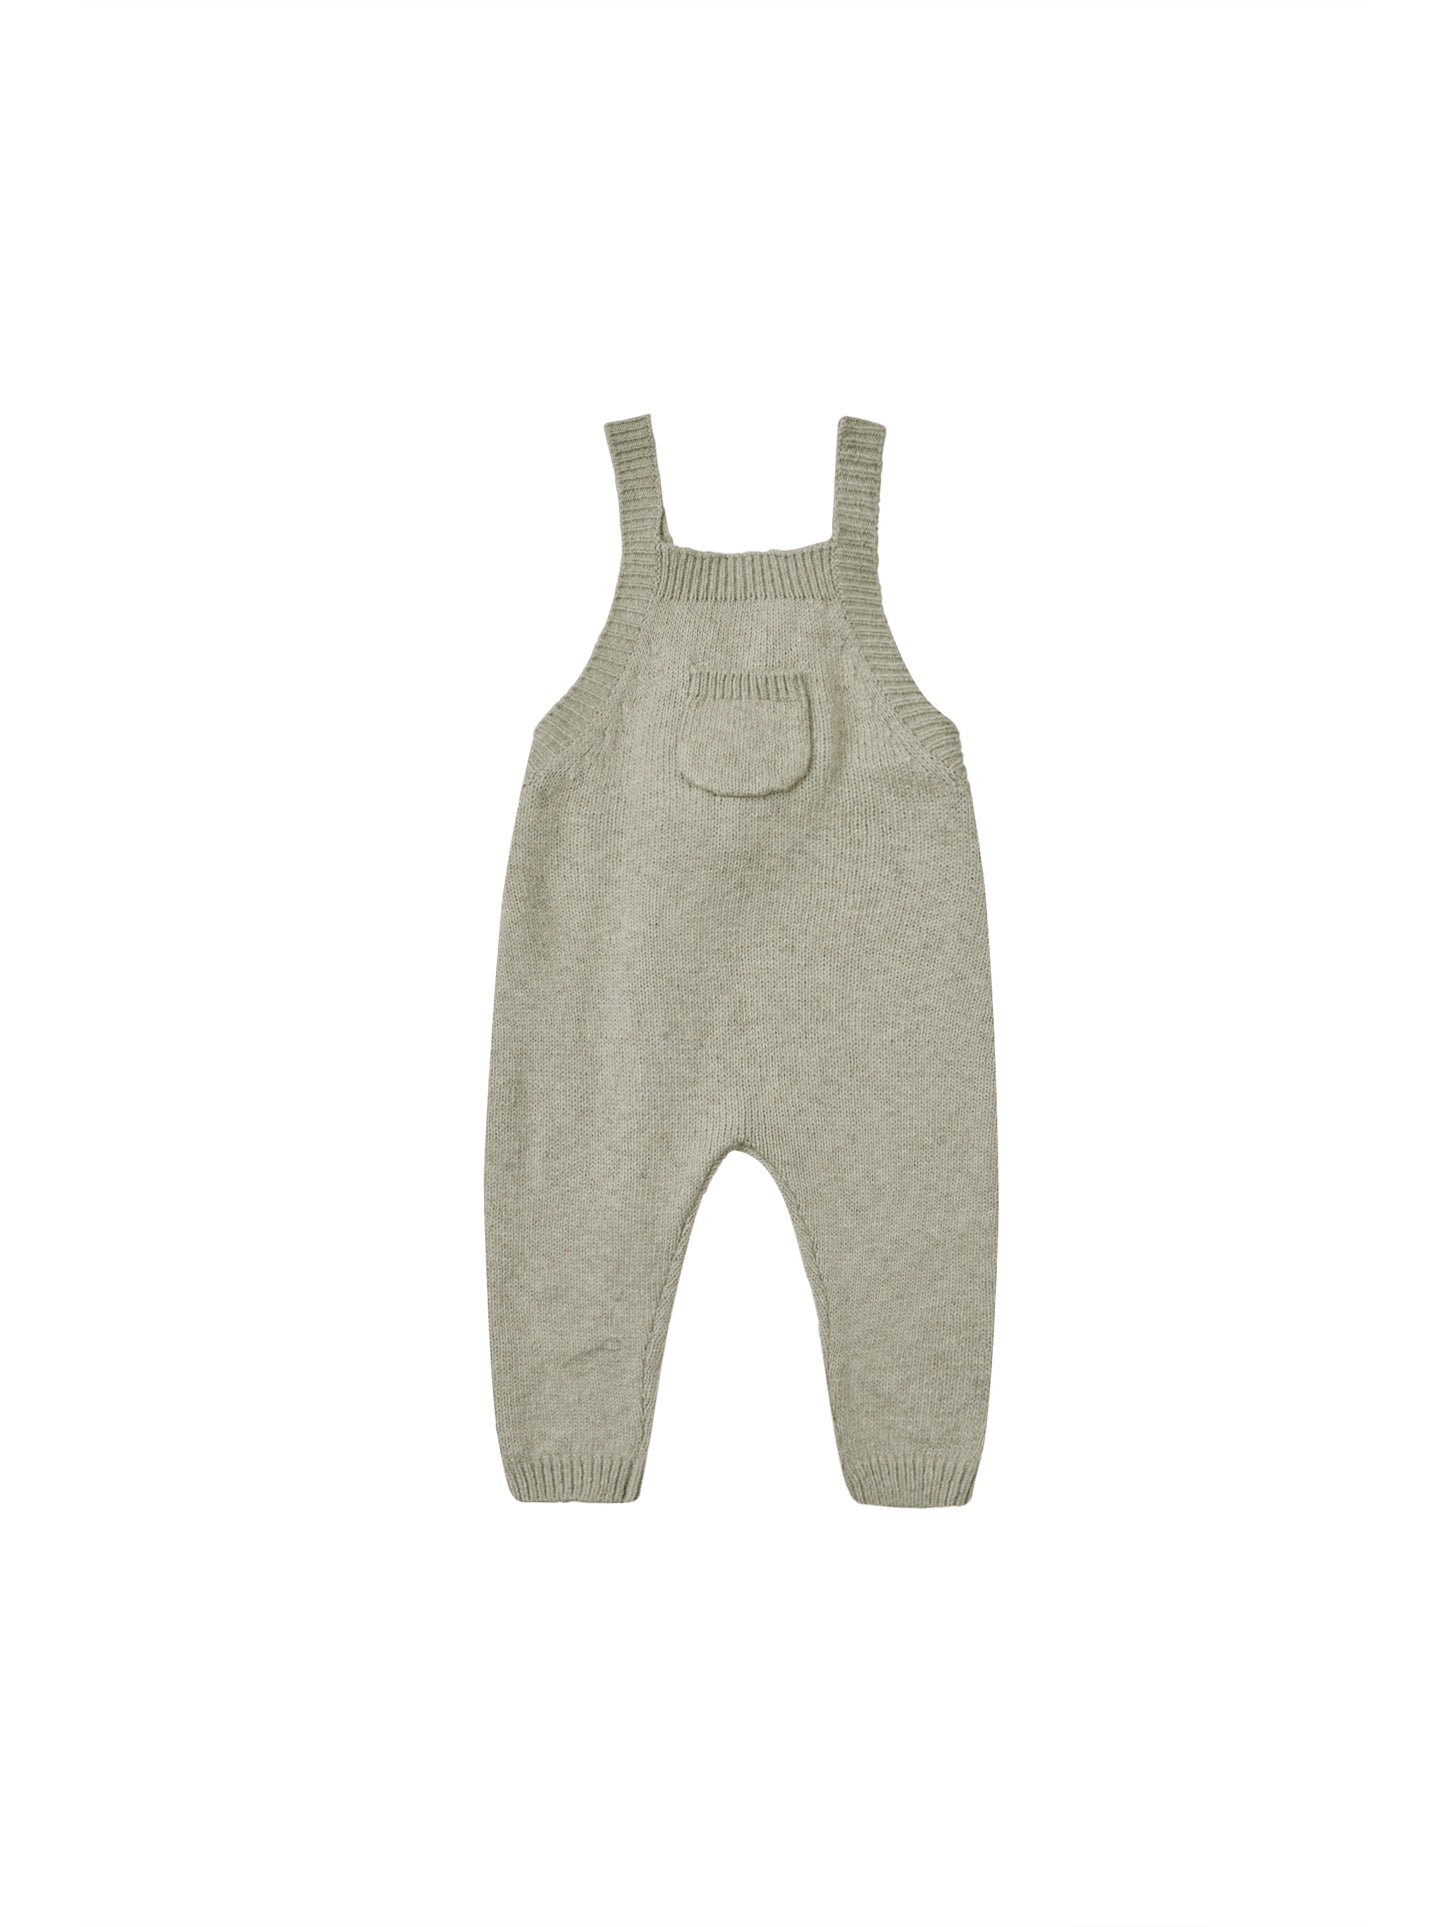 QUINCY MAE KNIT OVERALLS - SAGE